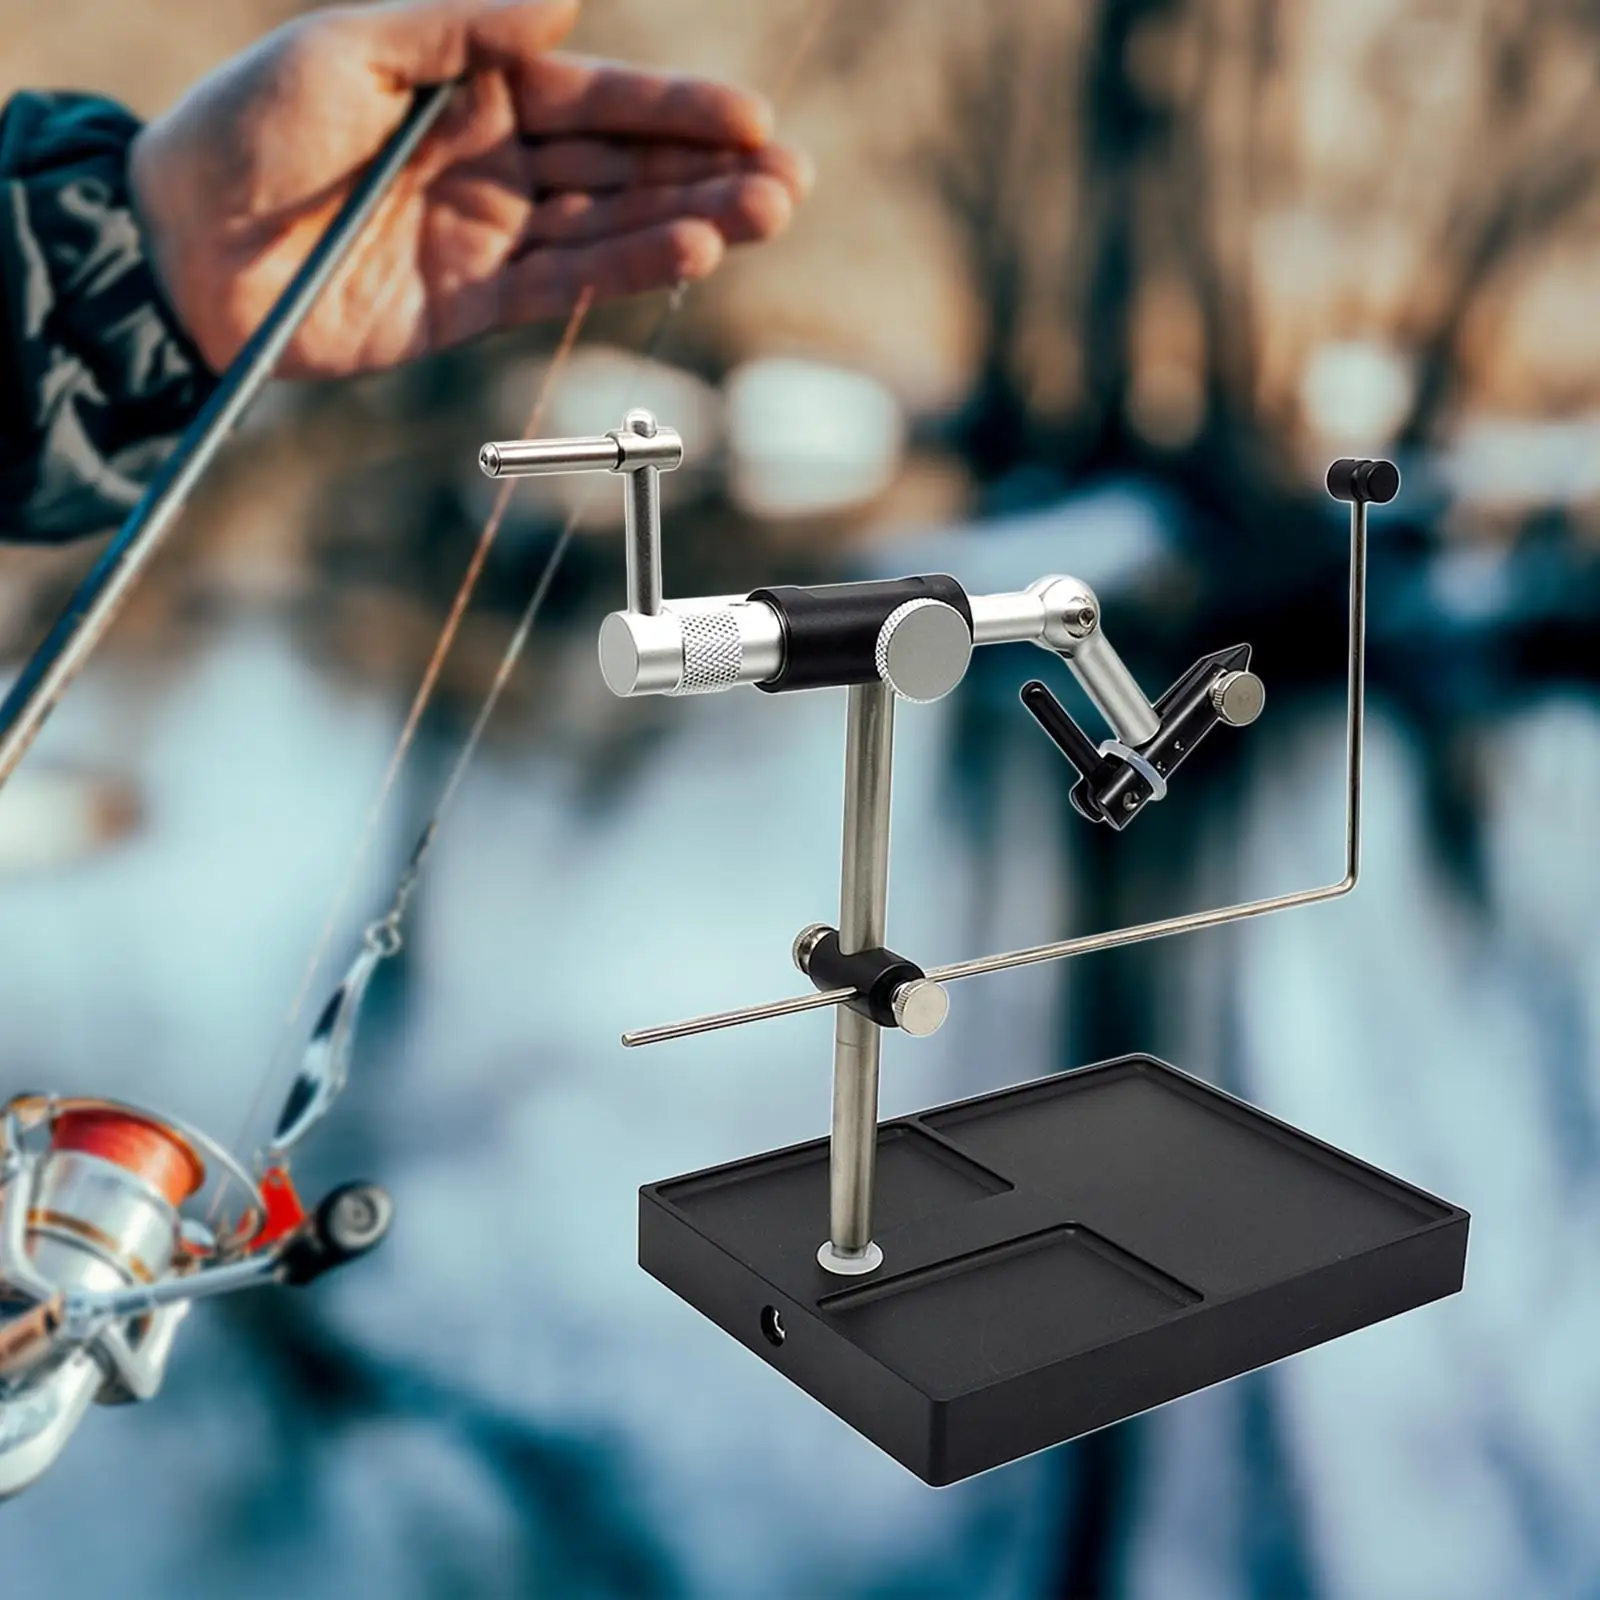 

Fly Tying Vise with Pedestal Base 360 Degree Rotary Fishing Flies Tying Tool Bobbin Thread Holder Flies Lure Making Accessories